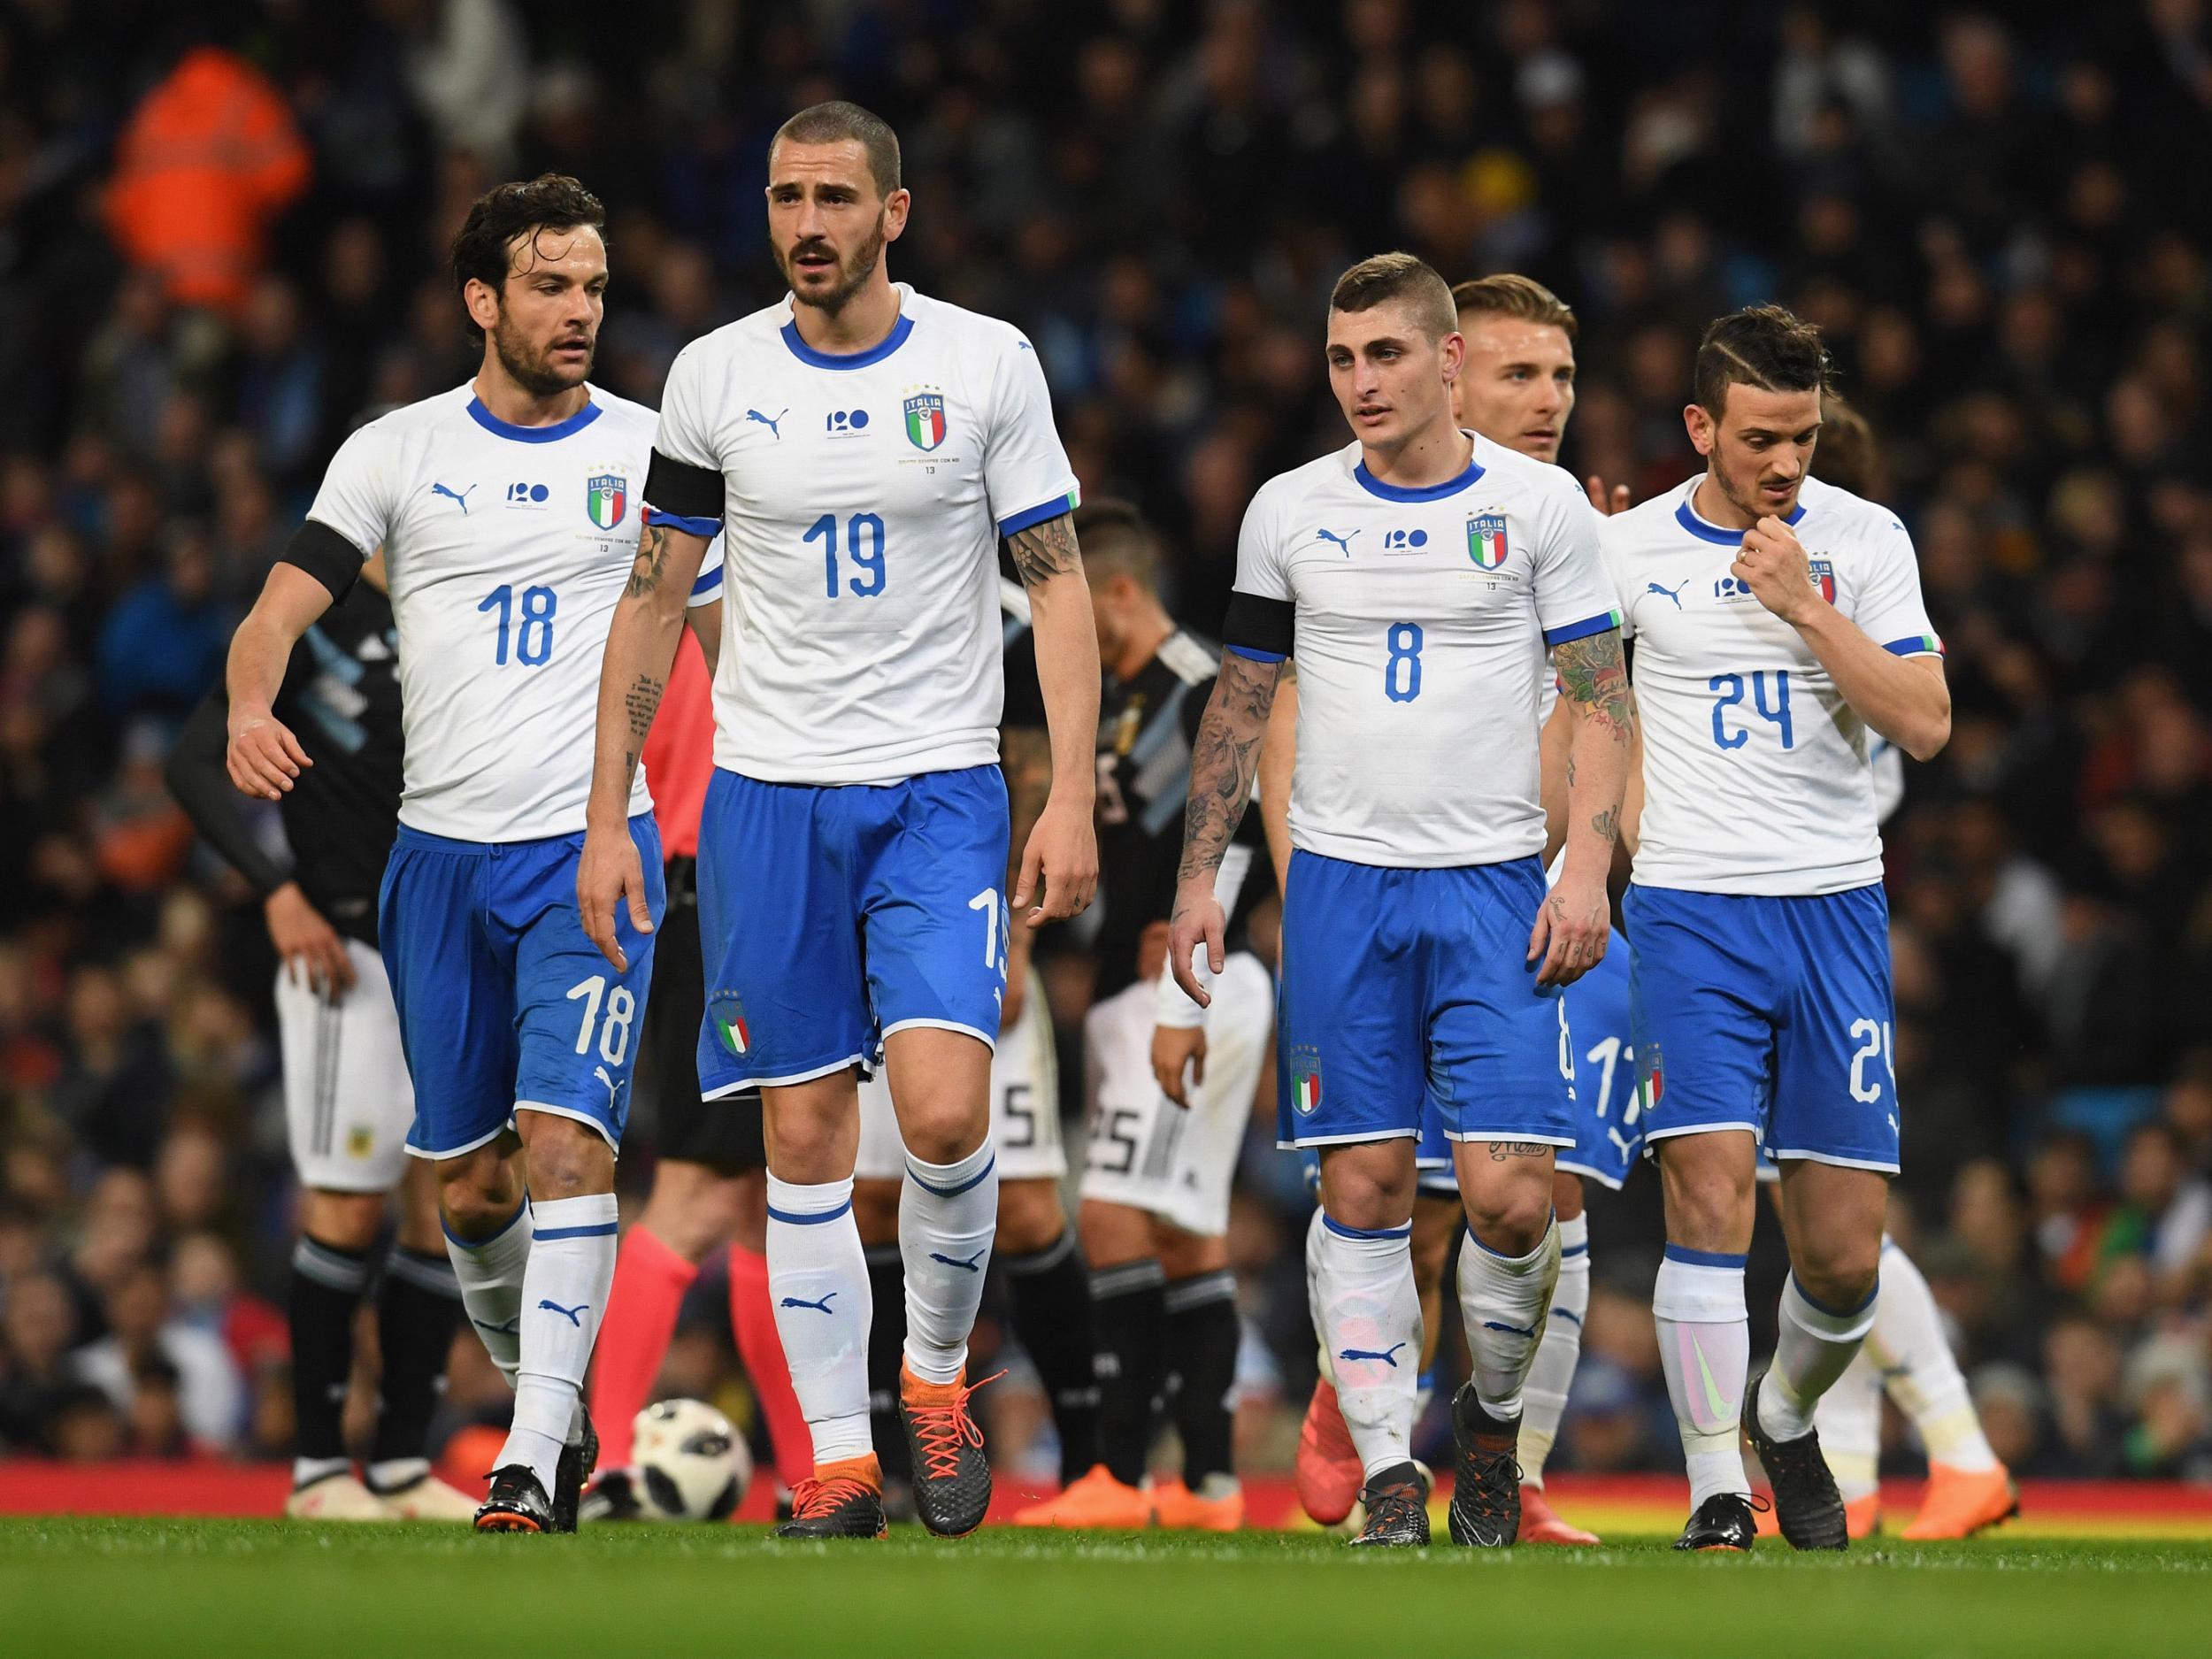 Italy are looking to bounce back from the disappointment of missing the World Cup this summer